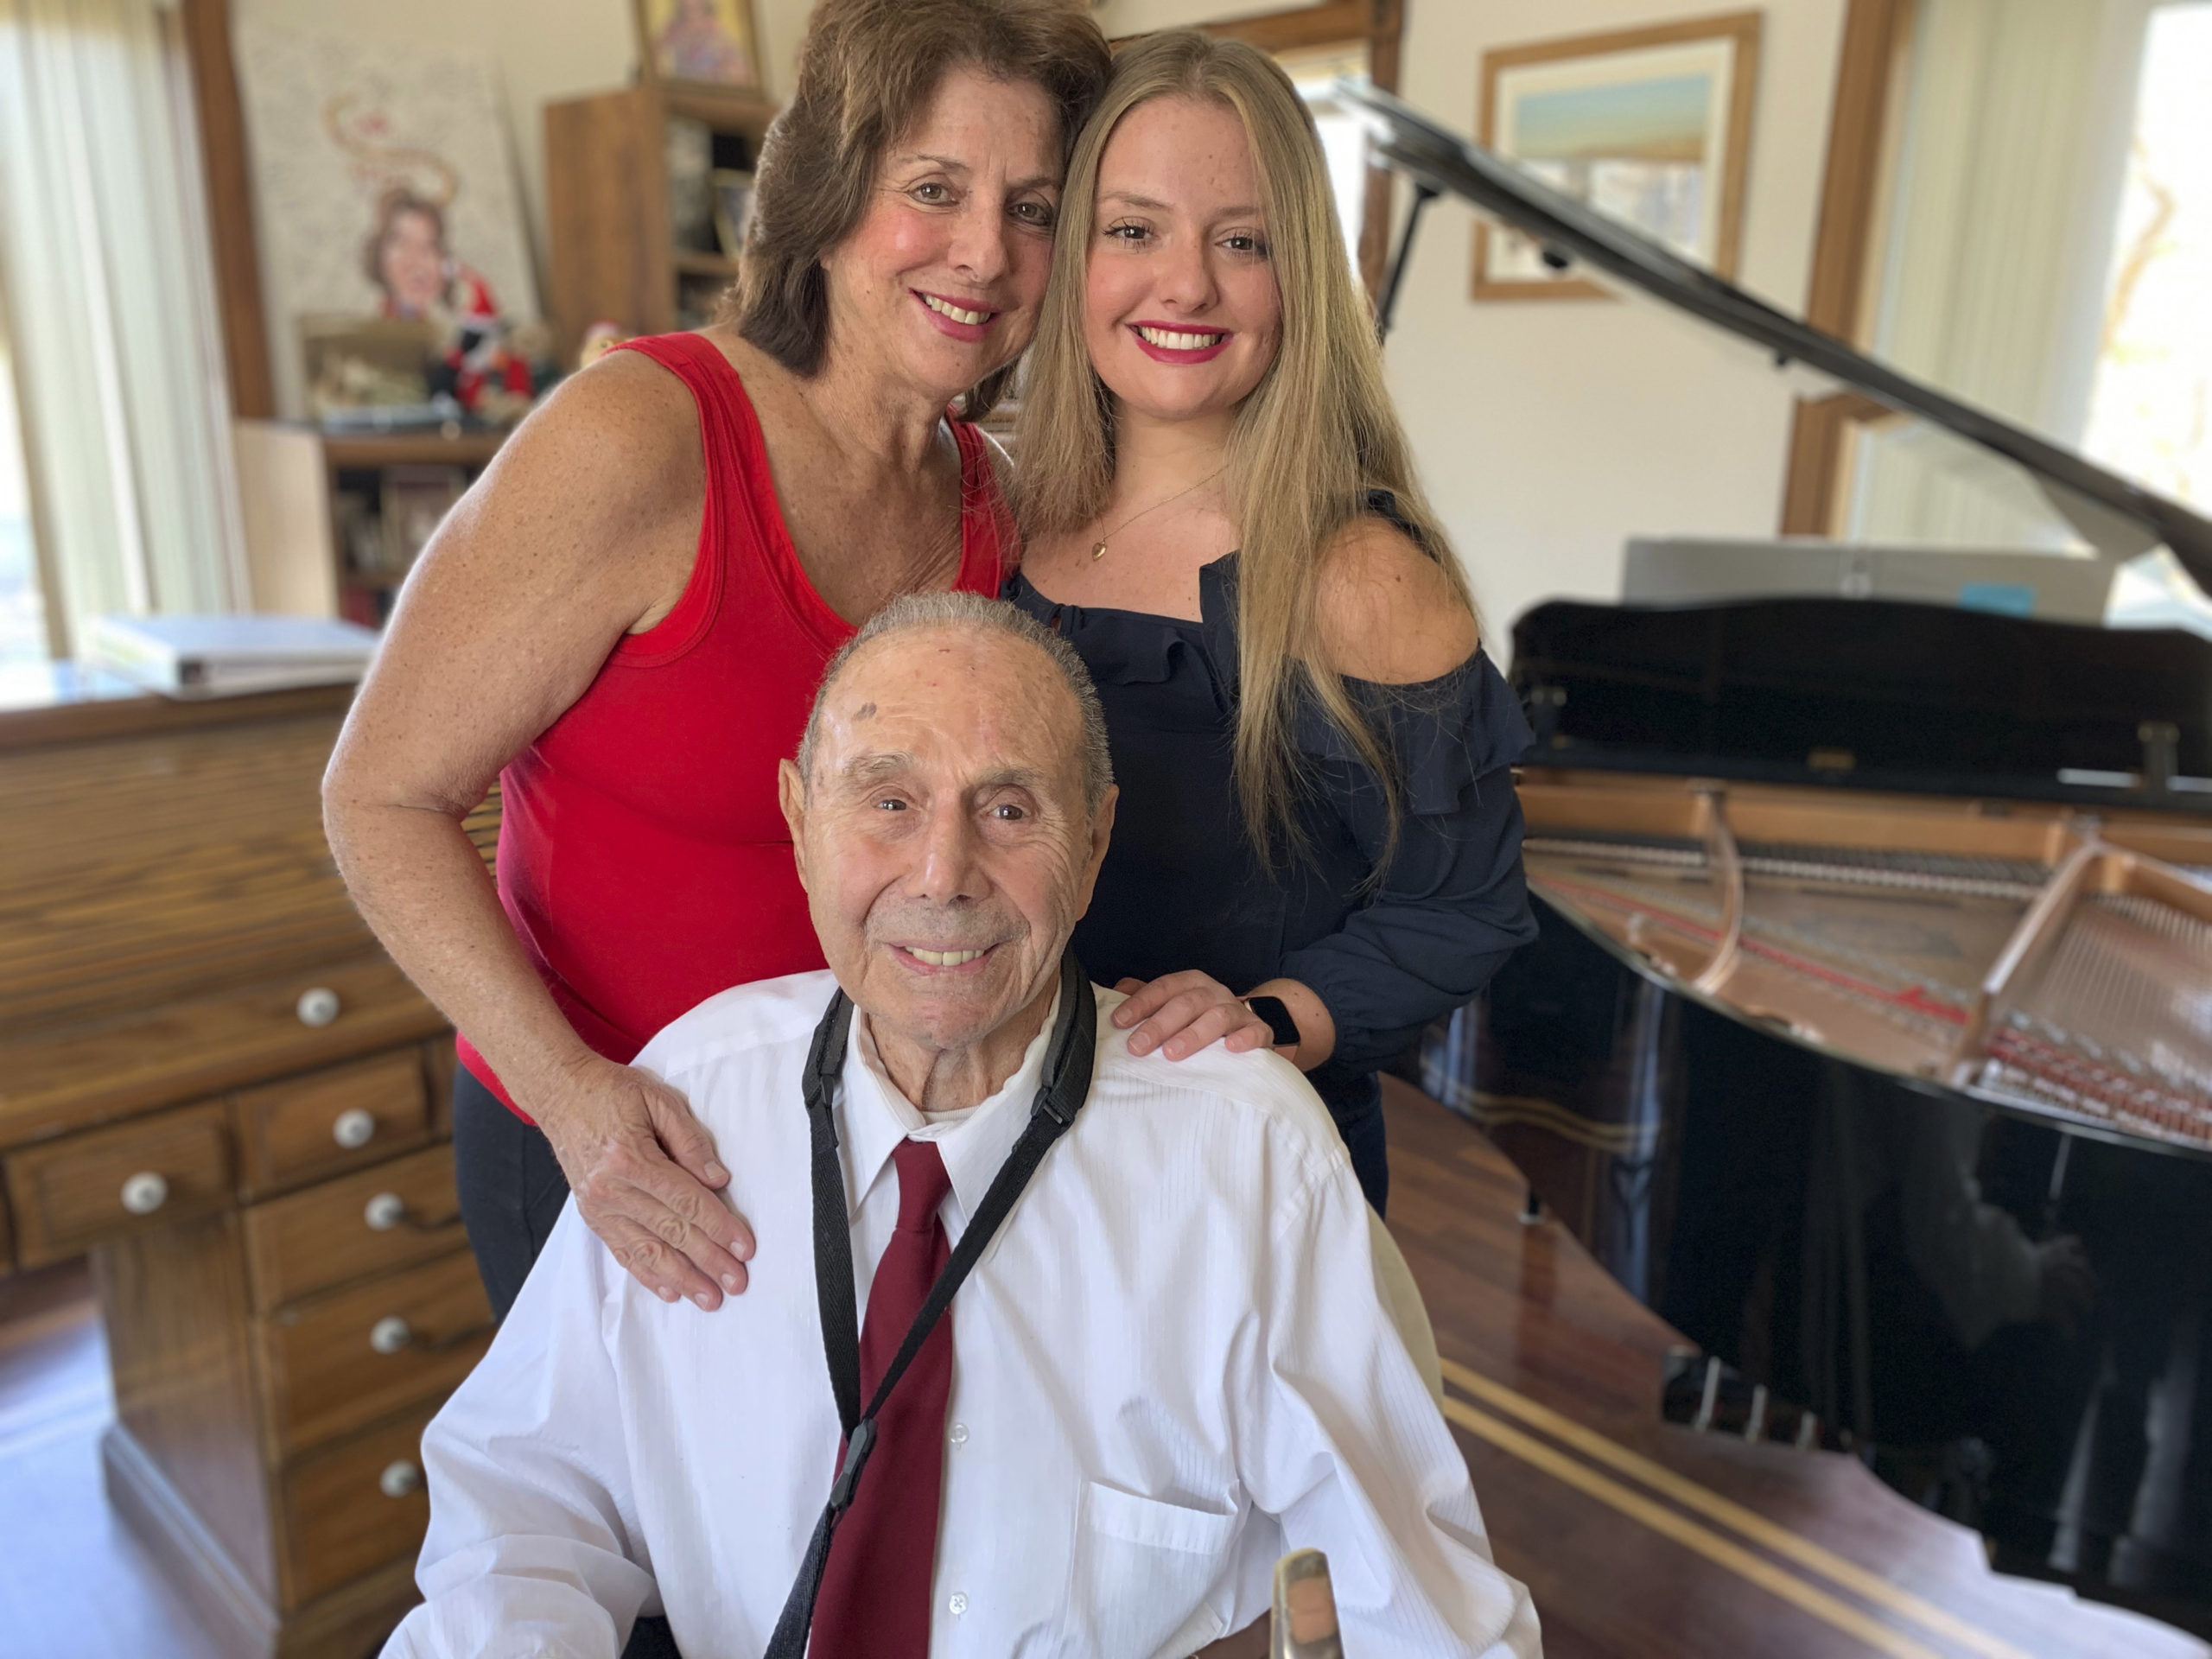 At 97, Montauk Sax Player Is Going Strong 
May 9 -- Montauk nonagenarian Pat DeRosa is a wailing sax man who, after a lifetime of making music, showed no signs of slowing down when interviewed at his home last spring. “I’m now 97 and still playing,” confided DeRosa. “I began playing in Brooklyn when I was 12. I started with the saxophone I got on Dekalb Avenue and I used to take lessons in the Bowery. It was pretty rough at the time and my mother would take me in.” These days, DeRosa lives with his daughter, Patricia DeRosa Padden, and granddaughter Nicole DeRosa Padden, who are also both musically-inclined. Together, they are The Pat DeRosa Jazz Orchestra and the trio performs frequently at venues across the East End. Over the years, DeRosa played with all the jazz greats and making music with legendary musicians, including John Coltrane, has been a way of life for the better part of a century. But still, one goal remains elusive — playing onstage alongside Billy Joel. Last we heard, DeRosa, who recently turned 98, was still hoping to join the Piano Man on stage at some point, and he continues to play regularly, just to stay in fine form. “Saxophone is keeping me young, busy and it’s good for my lungs,” said DeRosa. Billy Joel, we hope you’re listening.